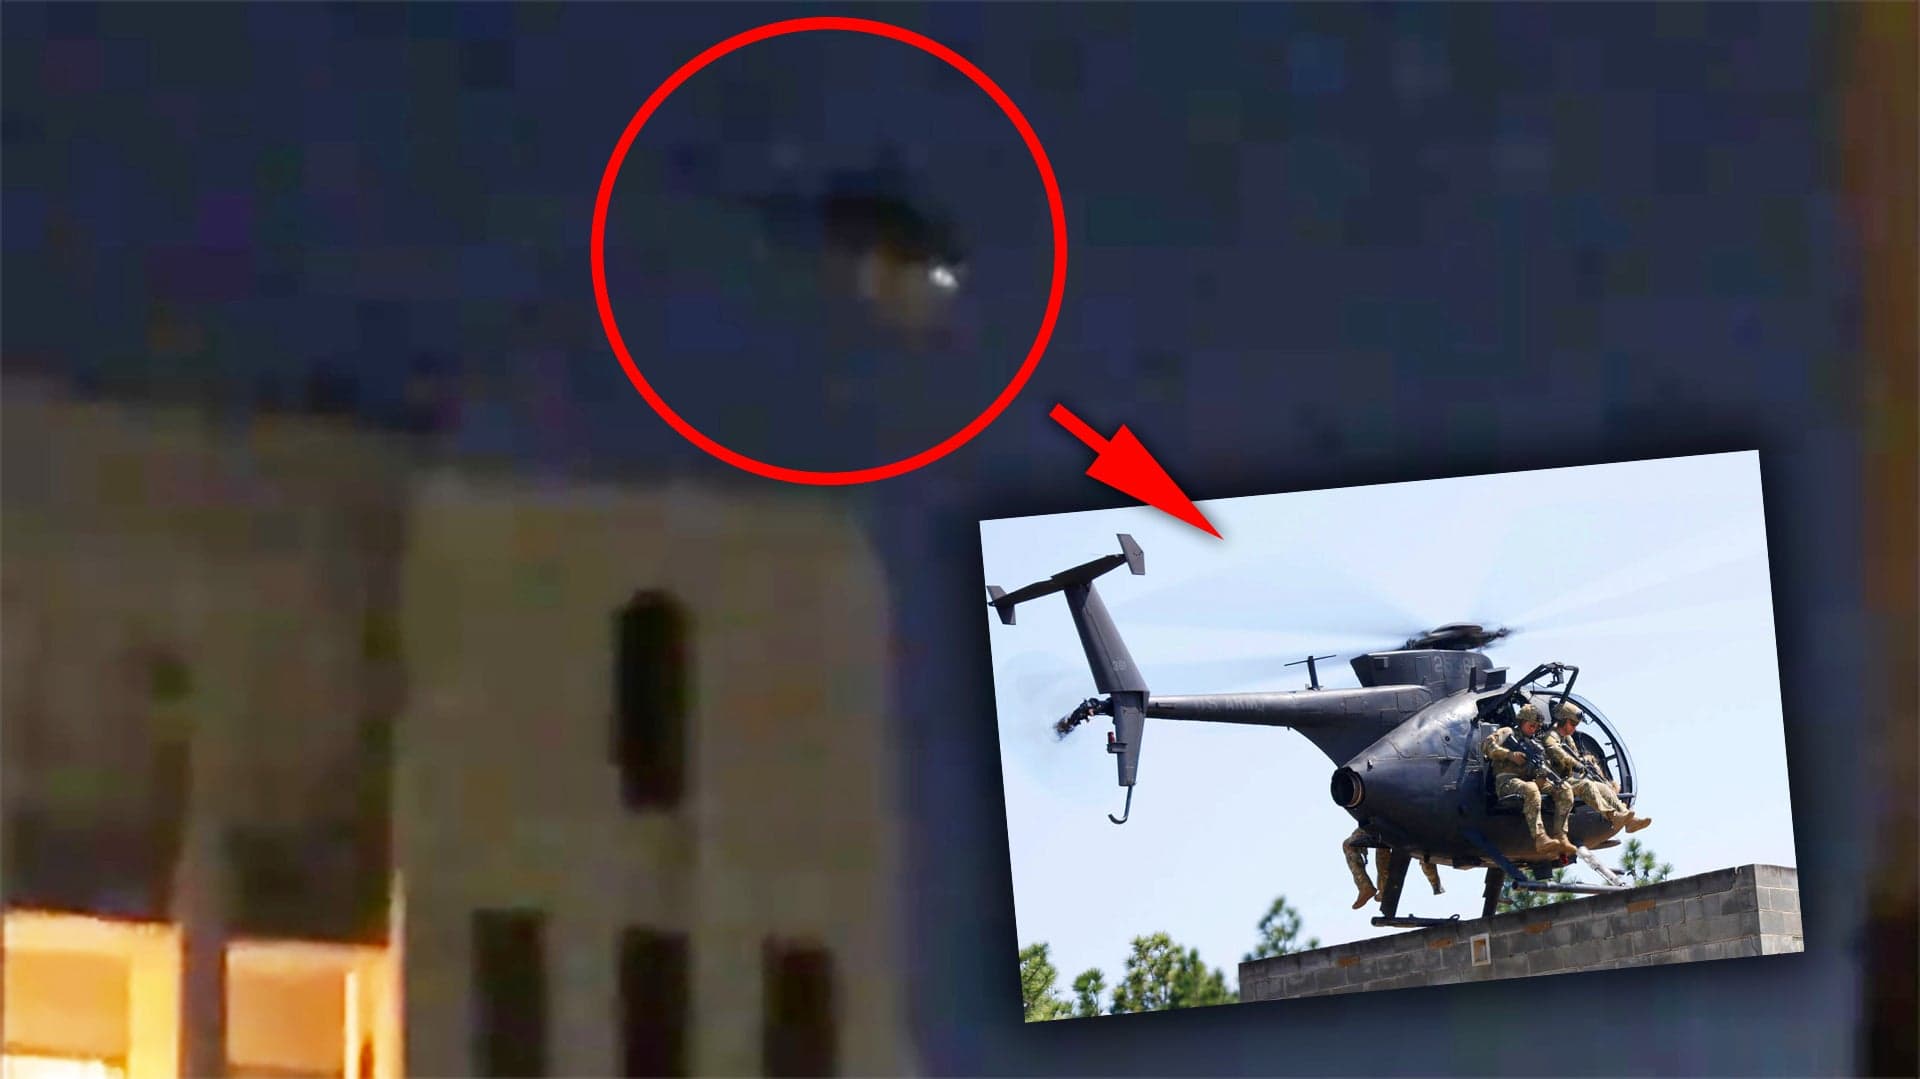 Here’s What All Those Black Helicopters Were Doing Zipping Around Los Angeles Last Night